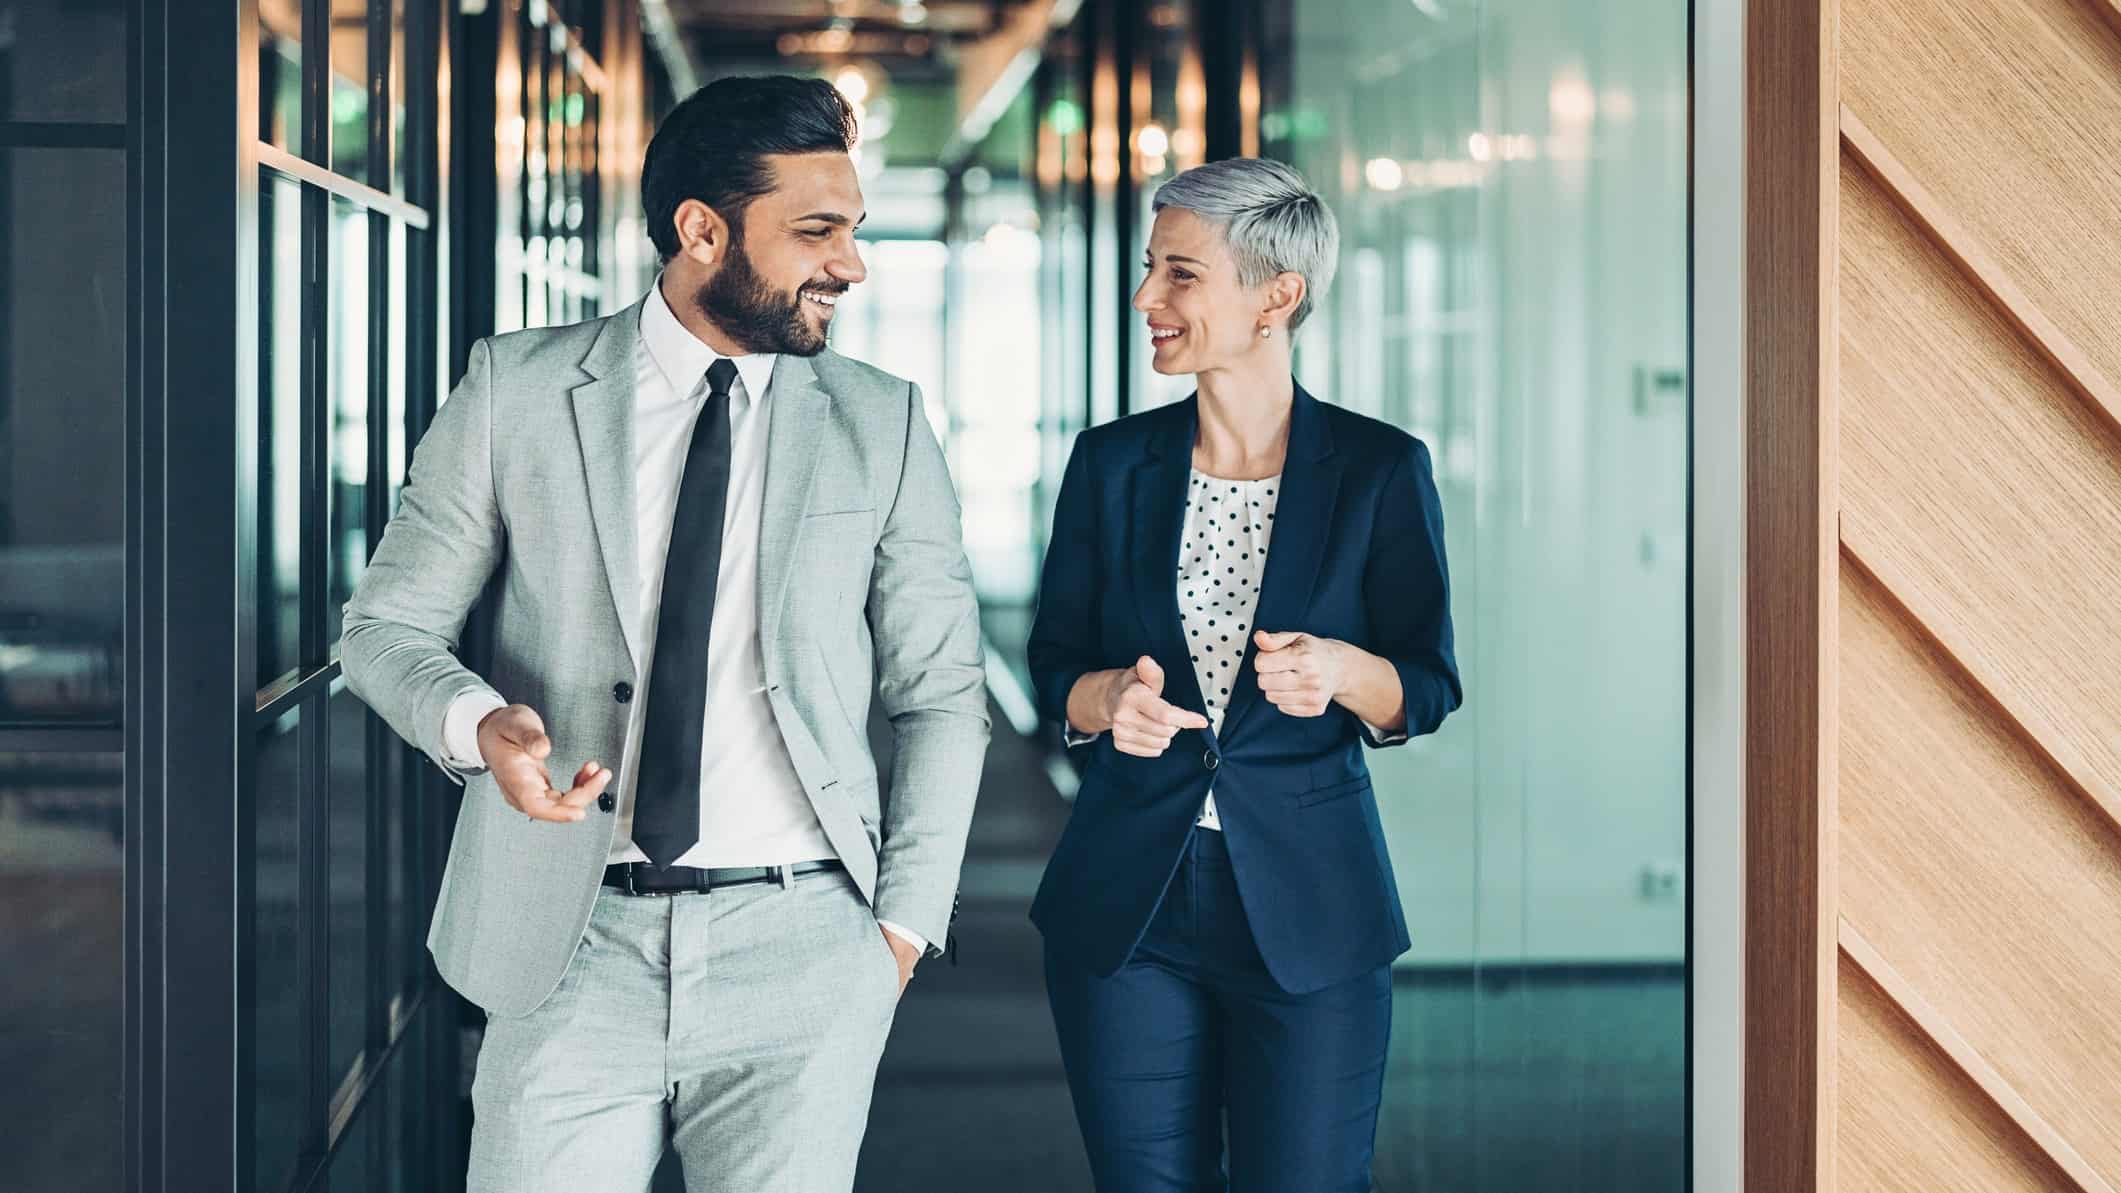 Two businesspeople walk together in an office, smiling as they enjoy a good business relationship.